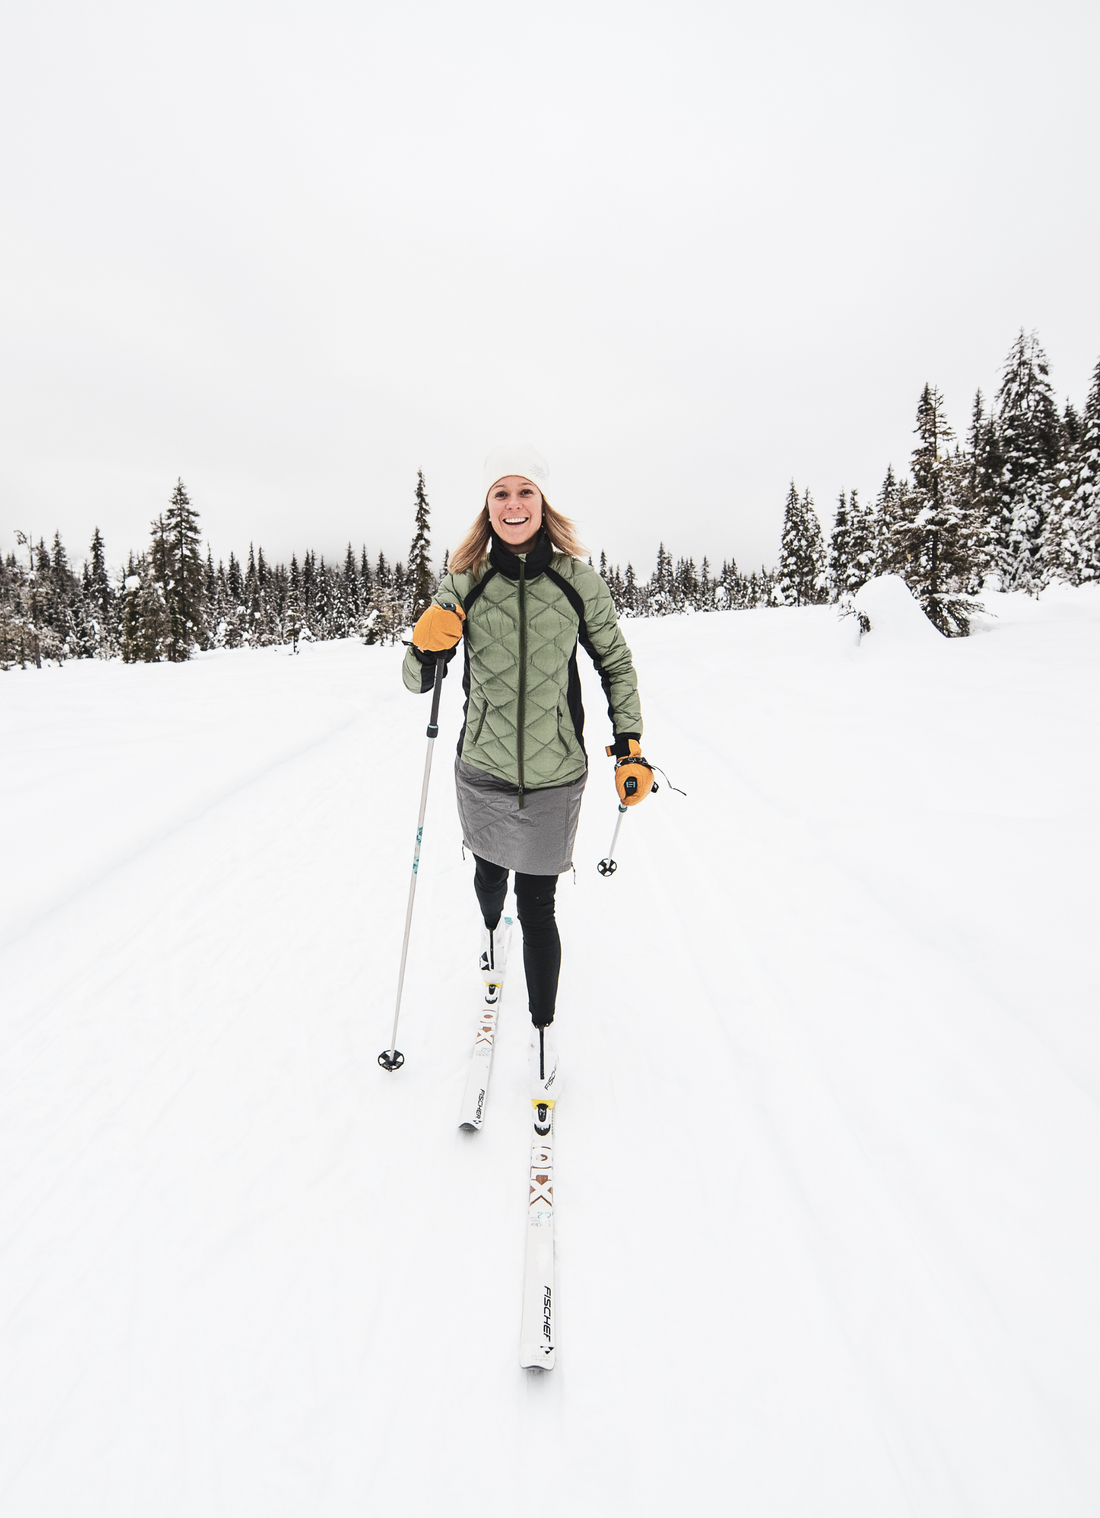 woman xc skiing wearing a puffy skhoop jacket and skirt